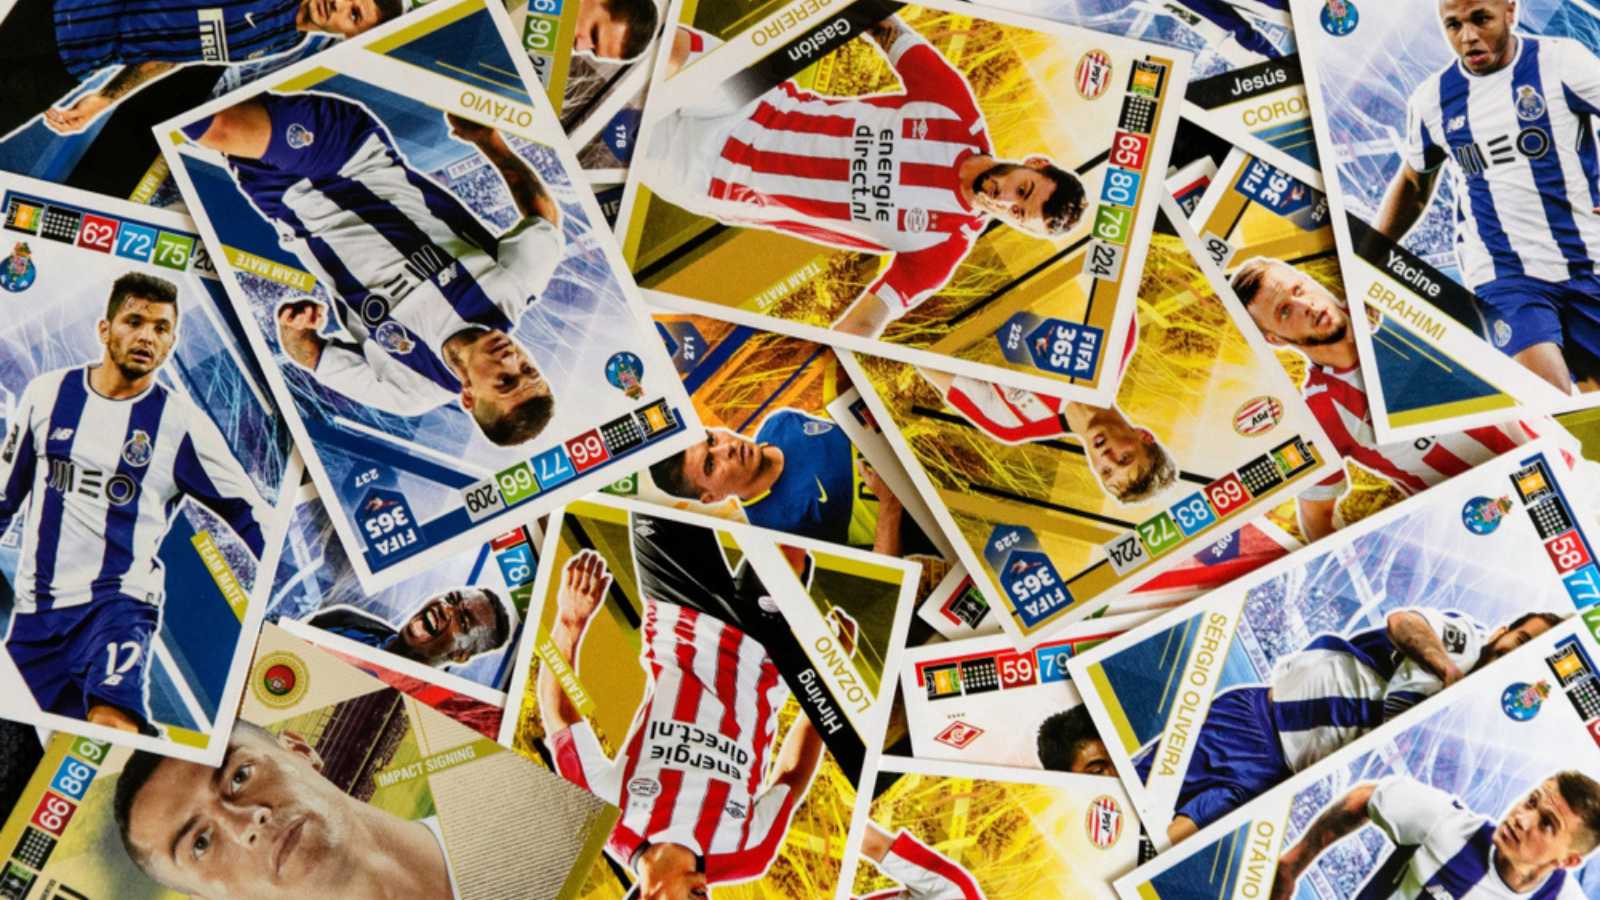 Warsaw, Poland - February 24 2019: Fifa Panini 365 cards collection 2019. A pile of cards with football/soccer players, messy look